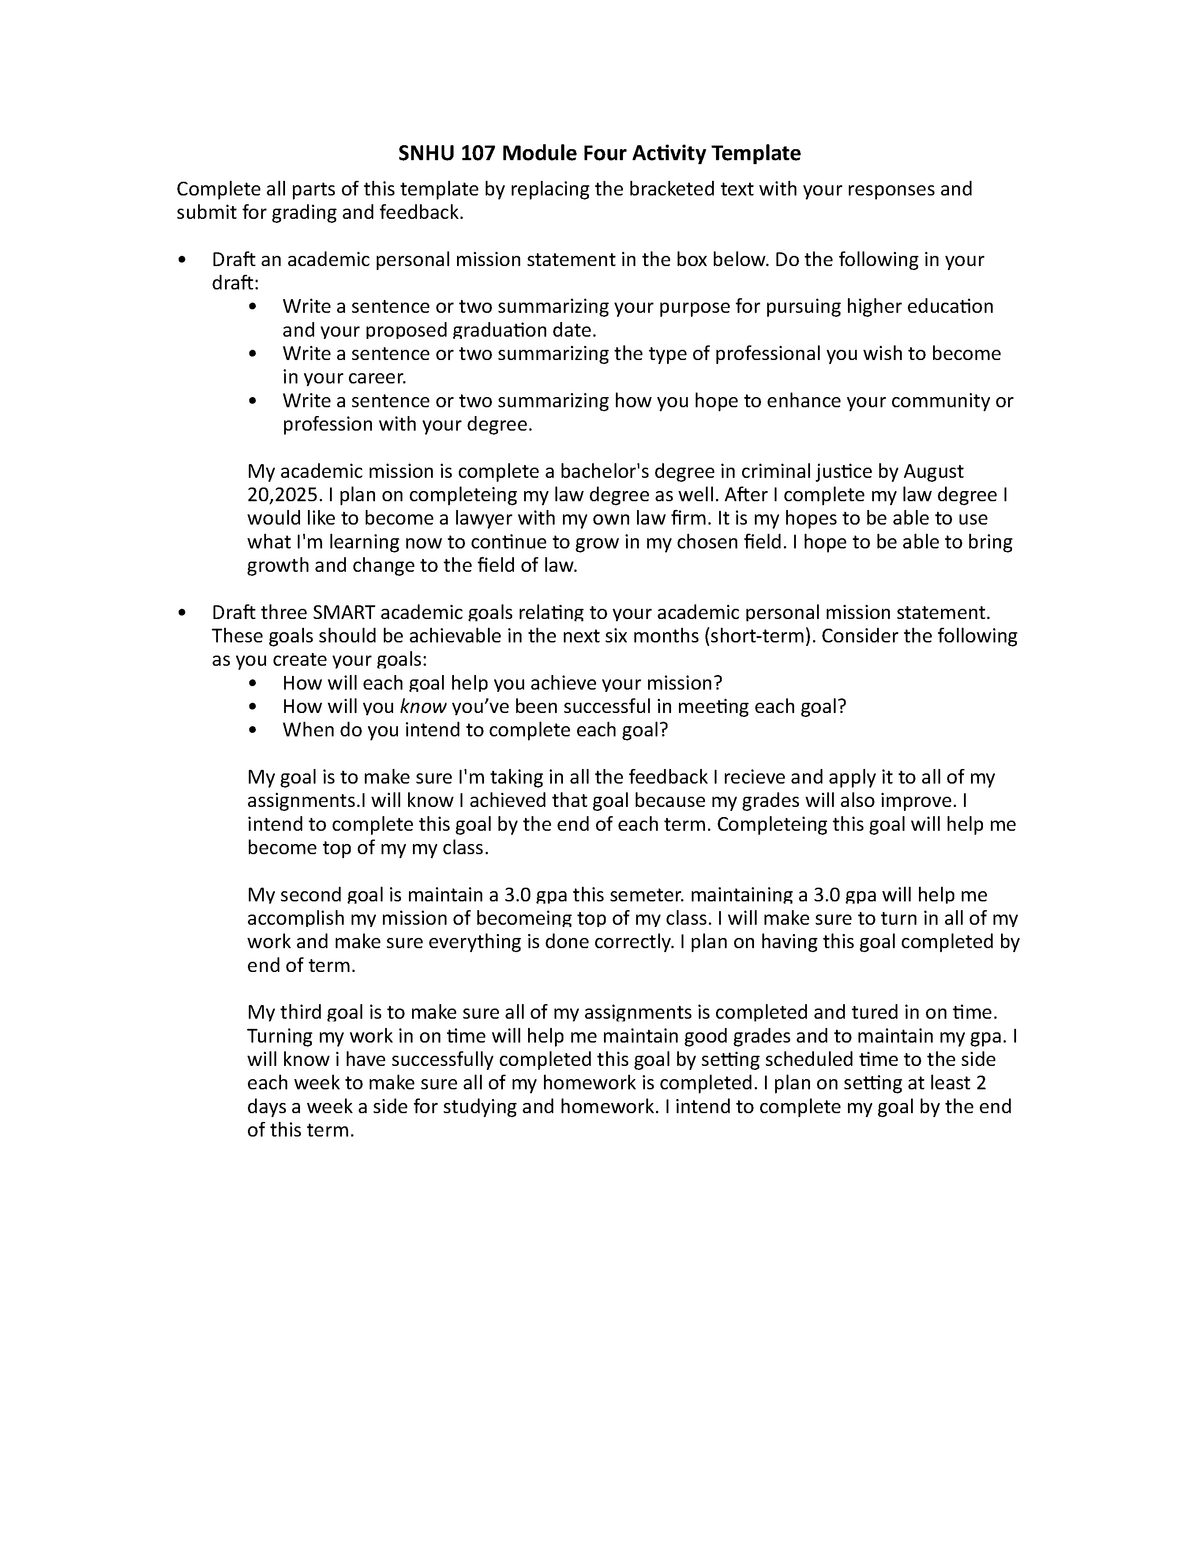 SNHU 107 assignment 2 N/a SNHU 107 Module Four Activity Template